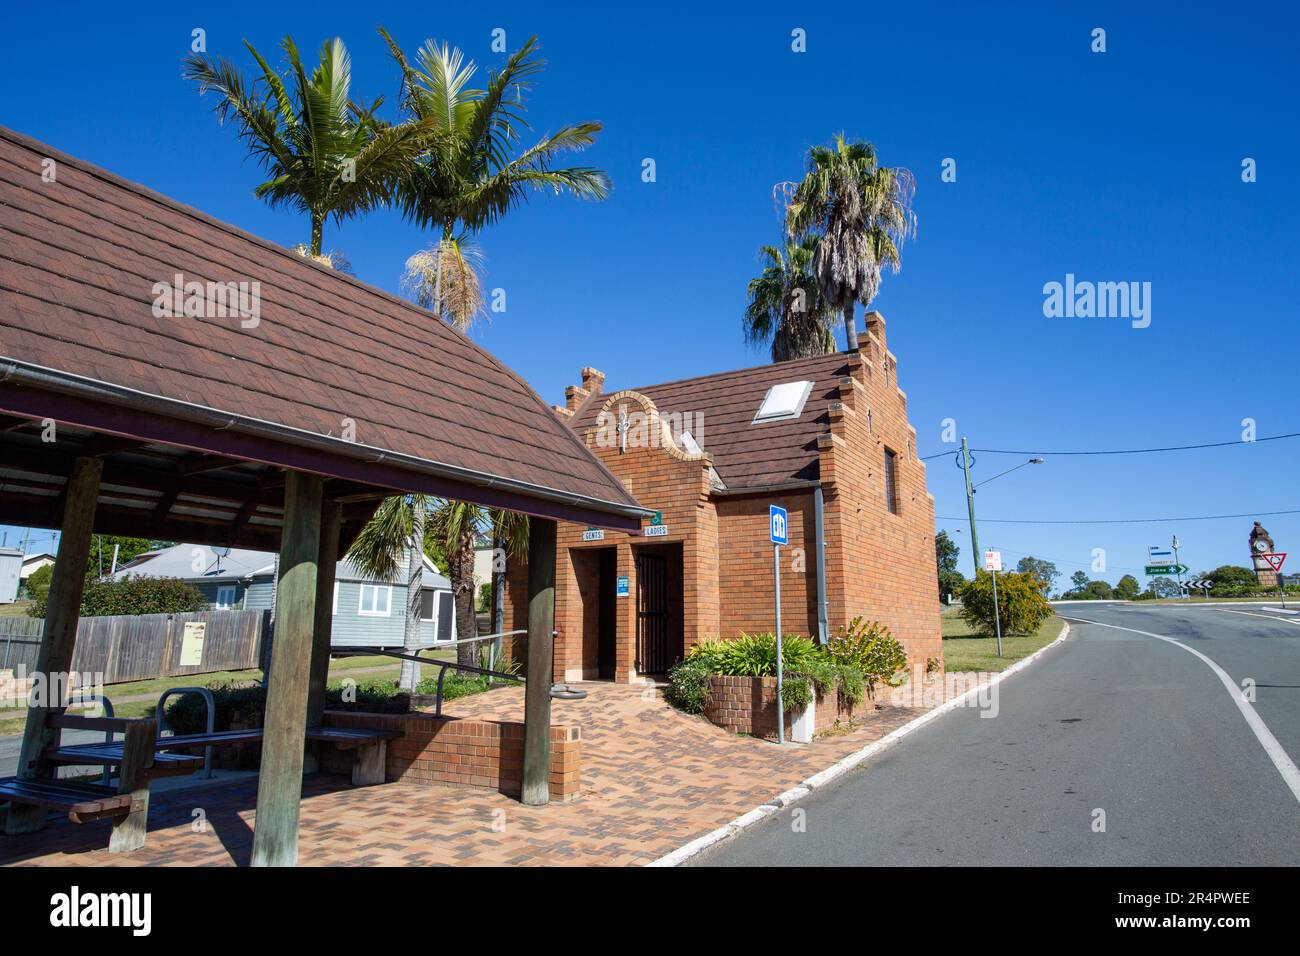 View of the historical restrooms at the coach stop in the main street of the rural town of Kilcoy, Queensland, Australia Stock Photo